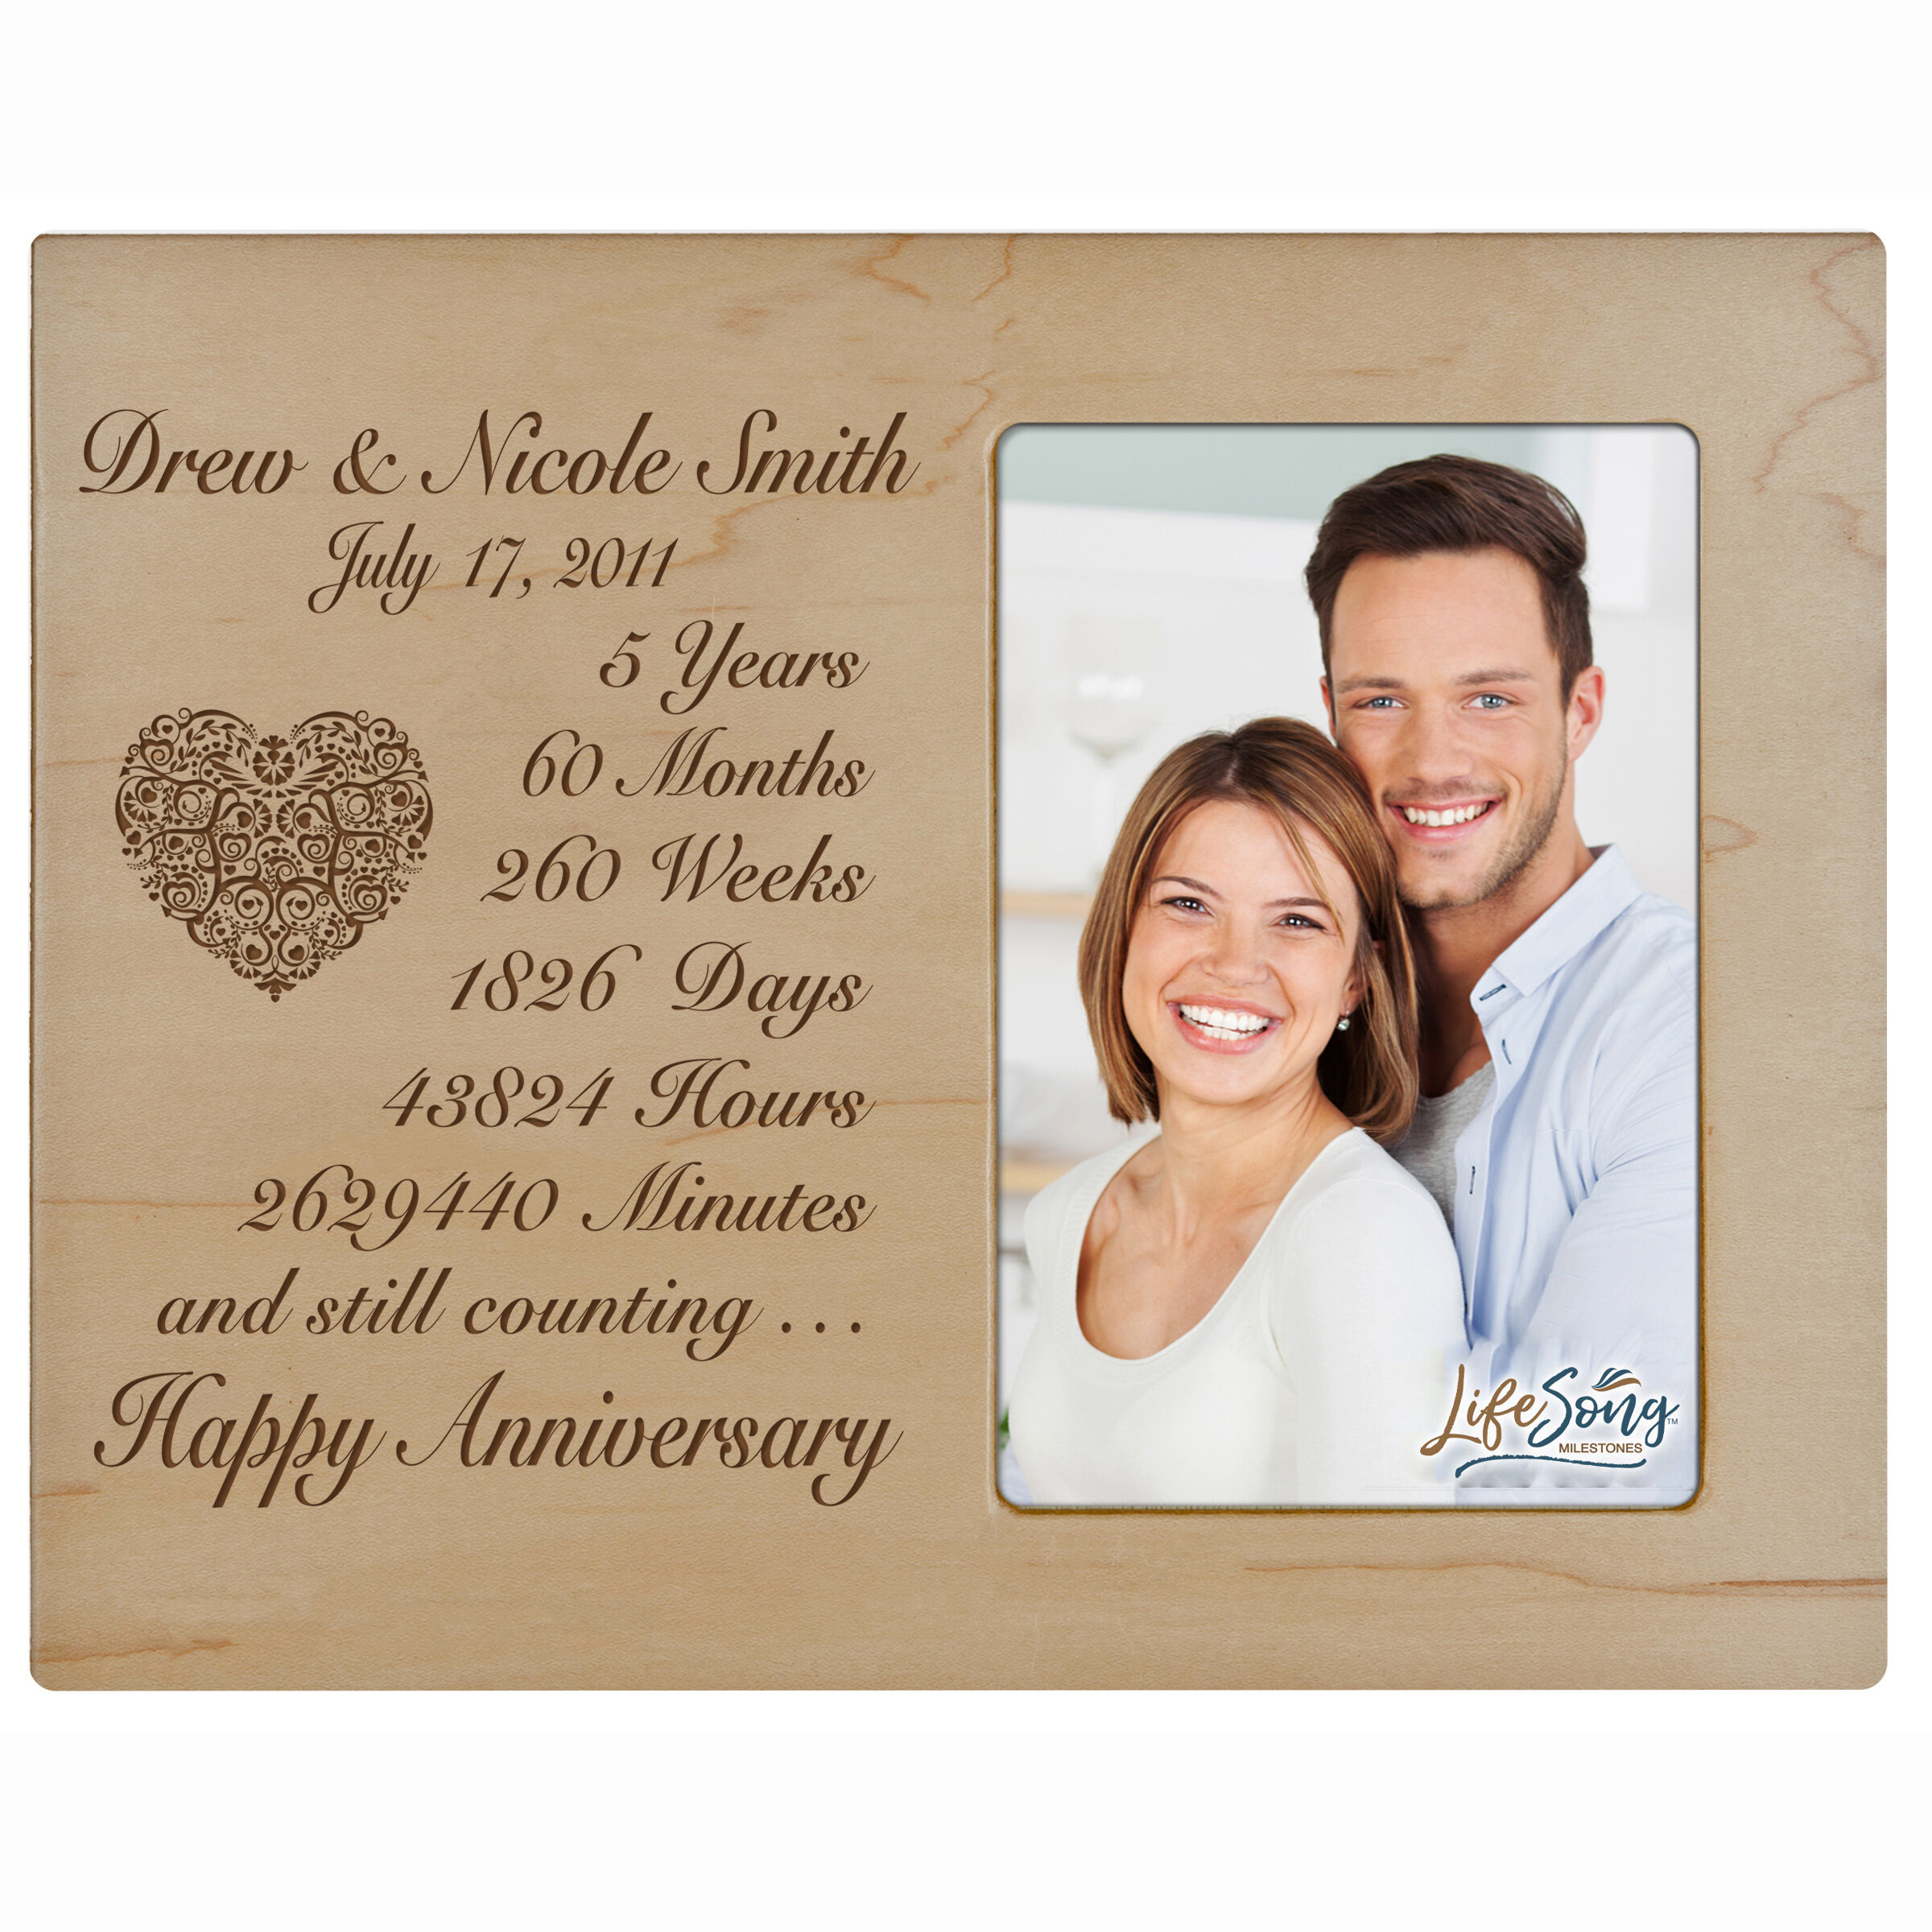 Happy Anniversary Five Year Wedding Keepsake Gift for Parents Husband Wife him her Holds 4x6 Photo 6.5x8.5 LifeSong Milestones 5th Anniversary Picture Frame 5 Years of Marriage 